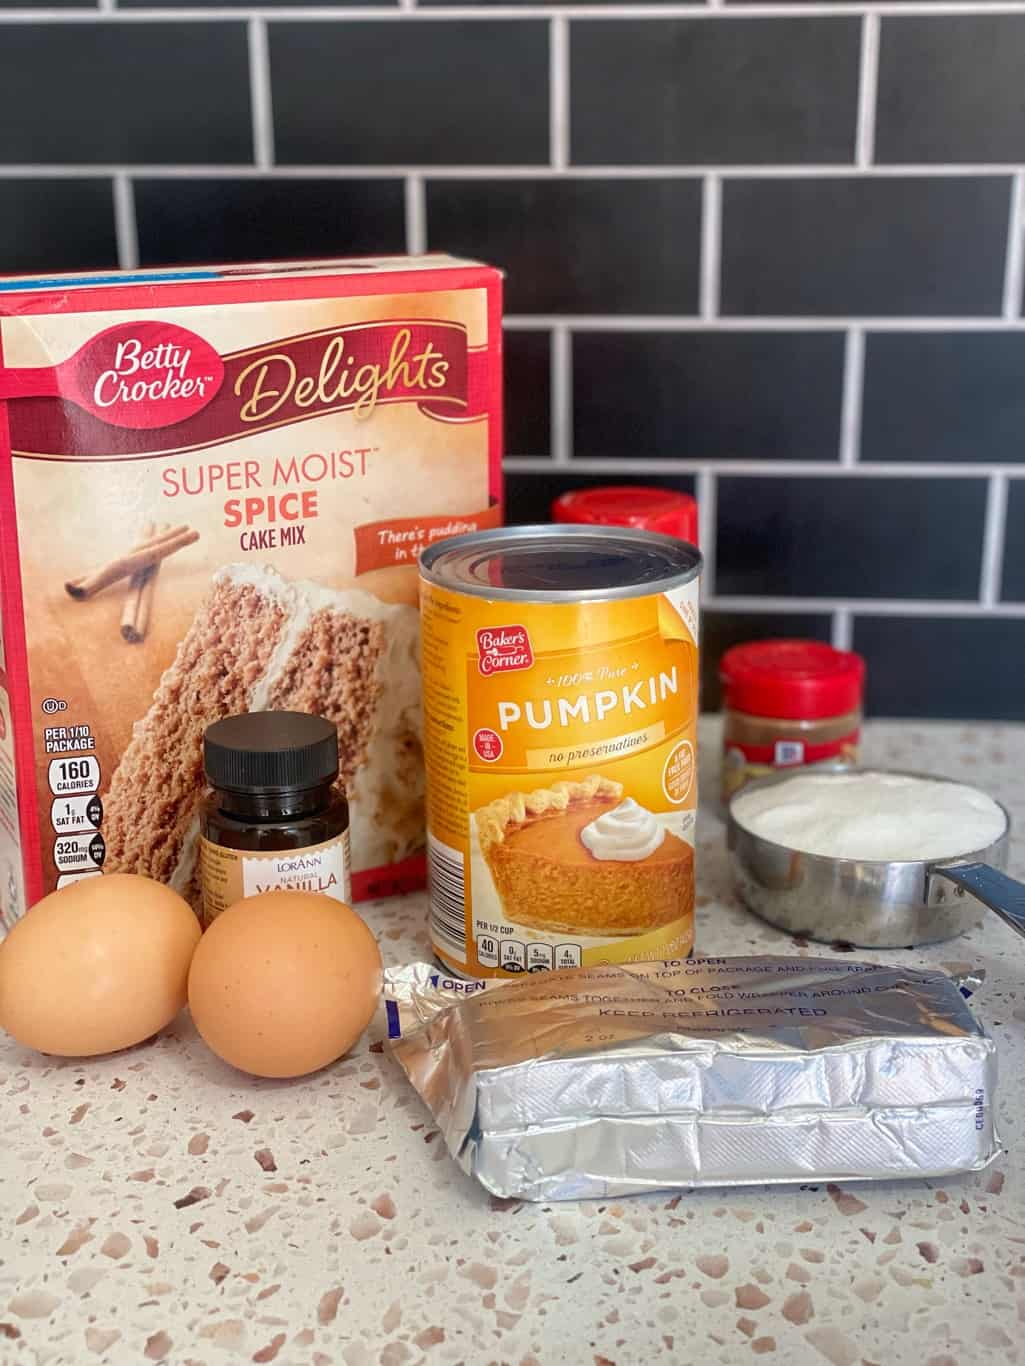 This pumpkin muffin recipe needs the following ingredients: canned pumpkin puree, eggs, spice cake mix box, pumpkin pie spice, Cinnamon, cream cheese, granulated sugar, and vanilla extract